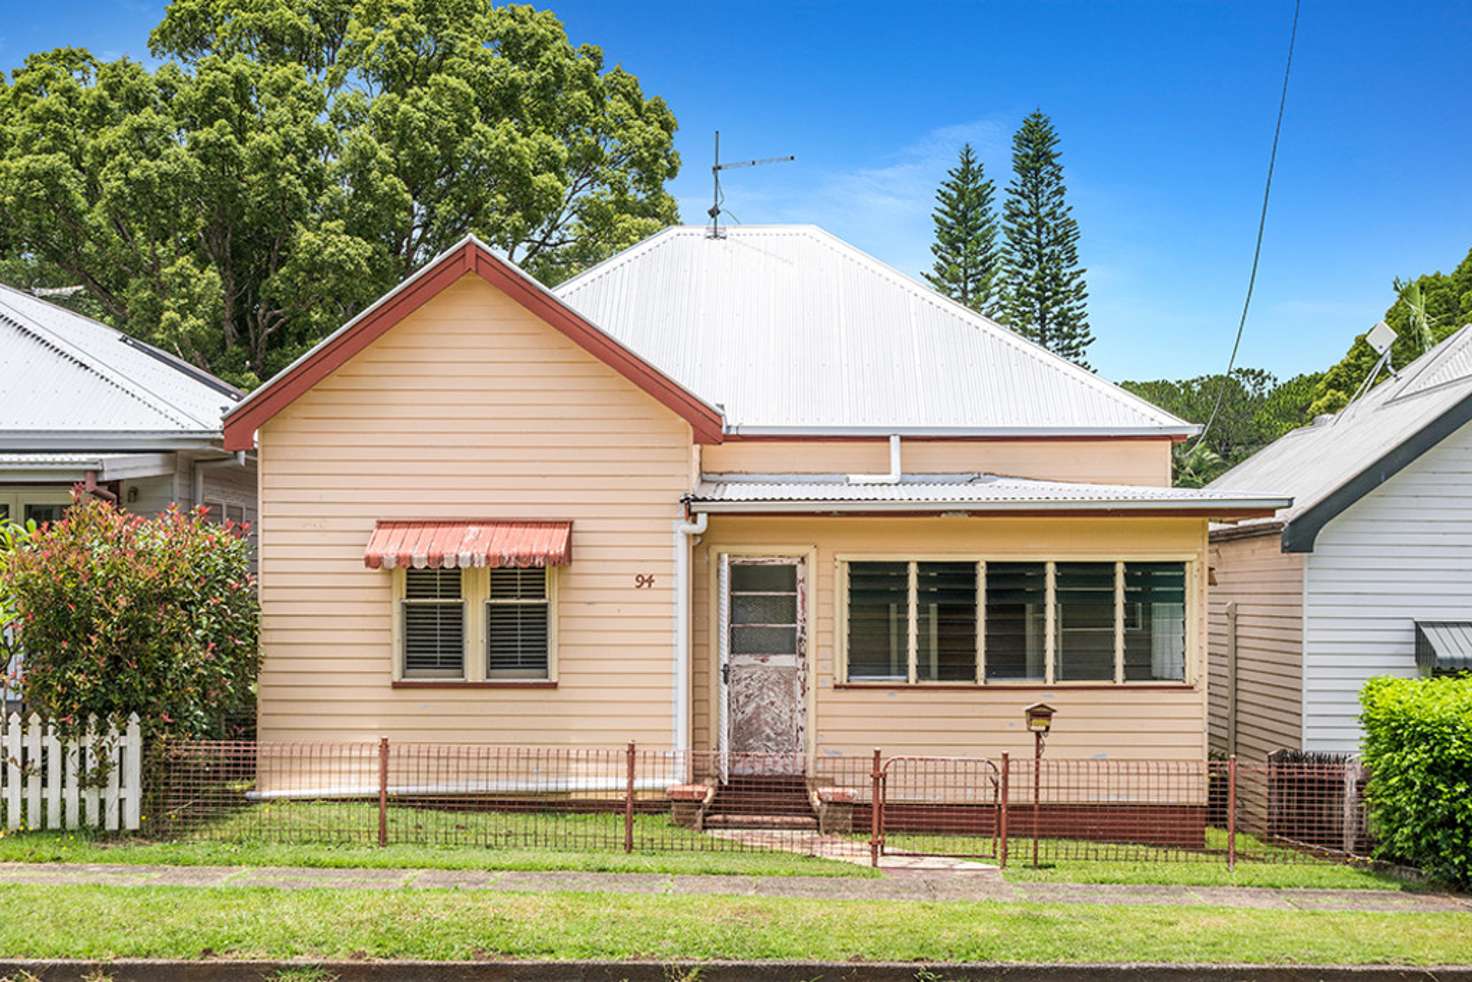 Main view of Homely house listing, 94 Byron Street, Bangalow NSW 2479